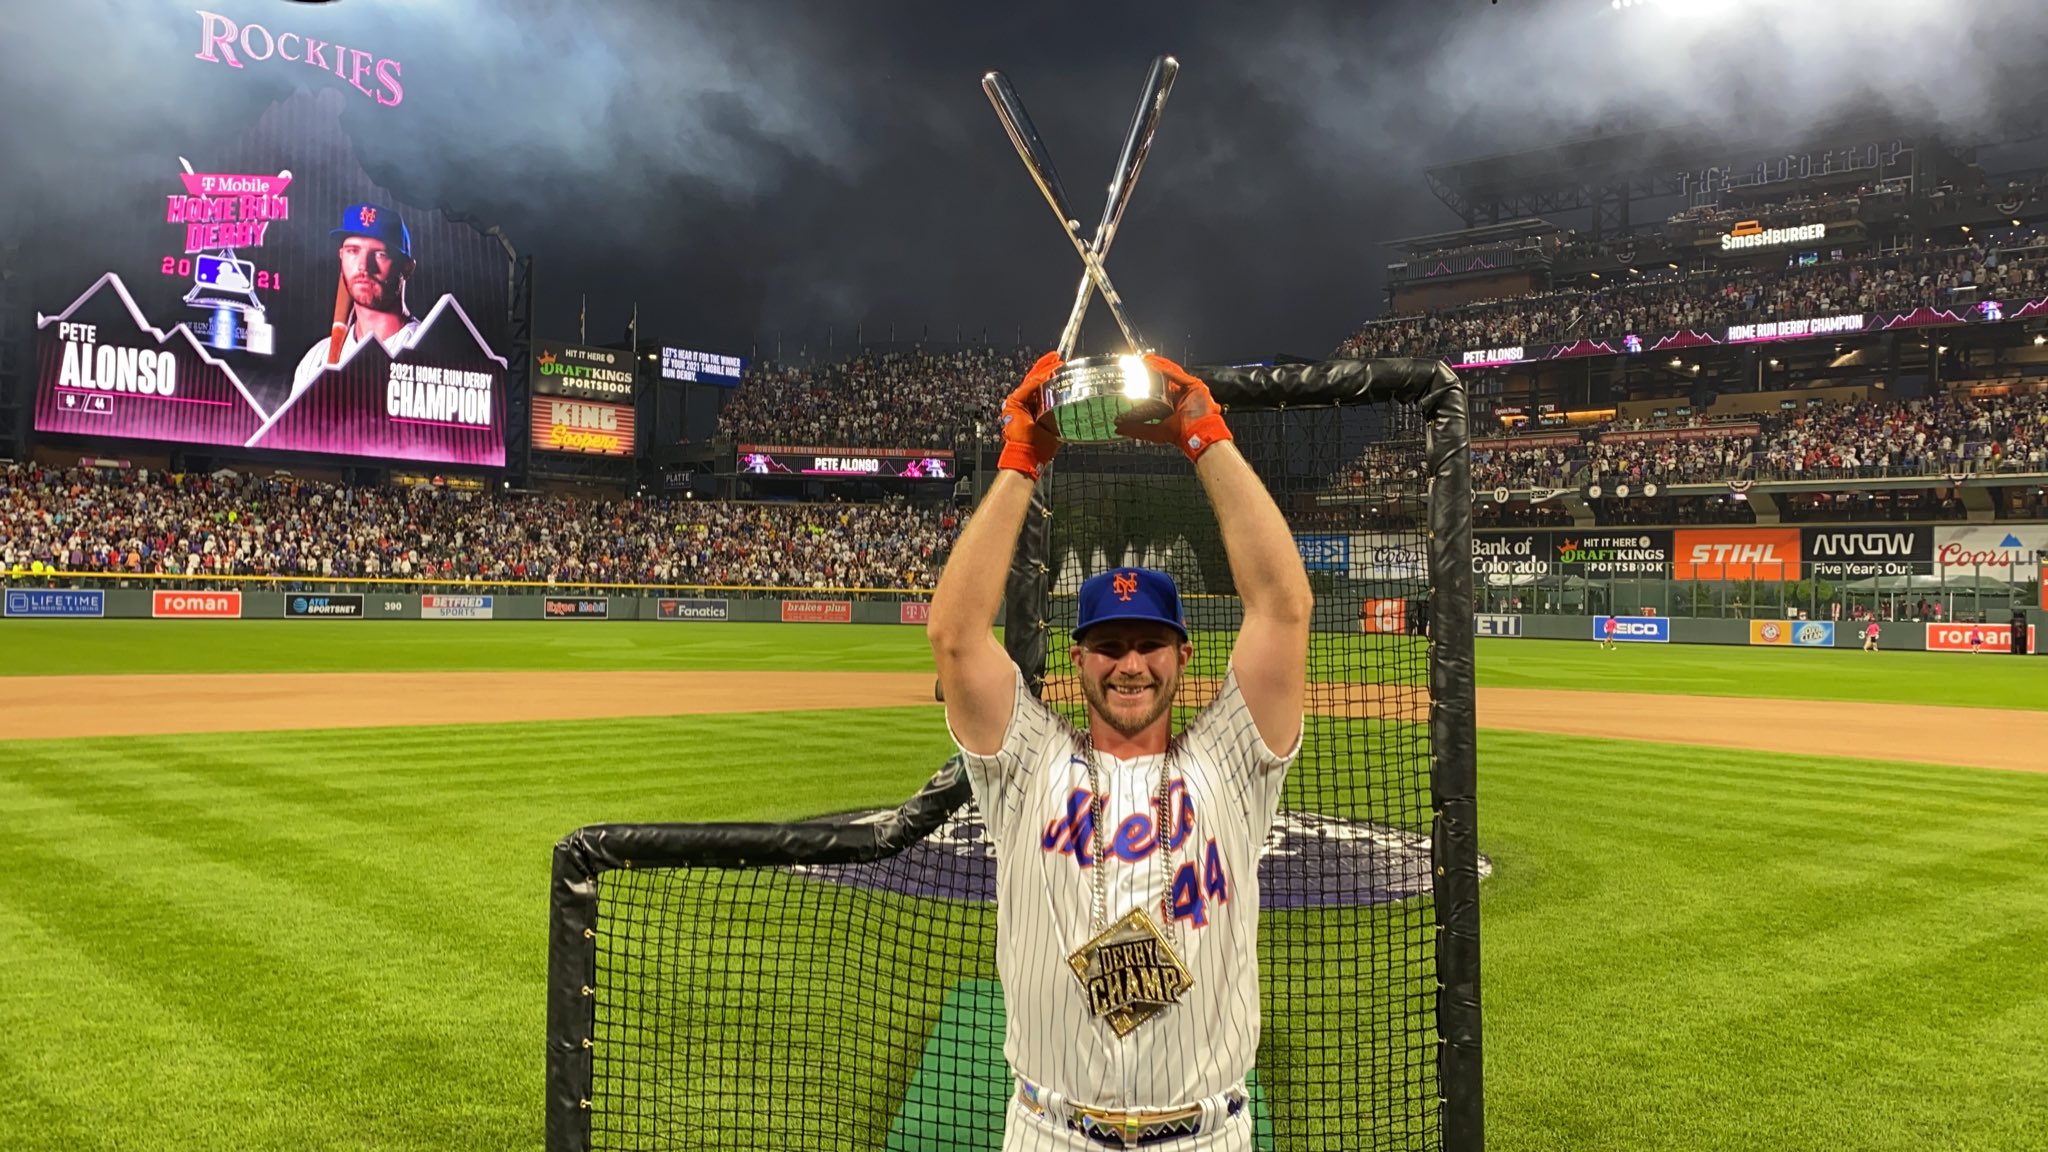 pete alonso home run derby